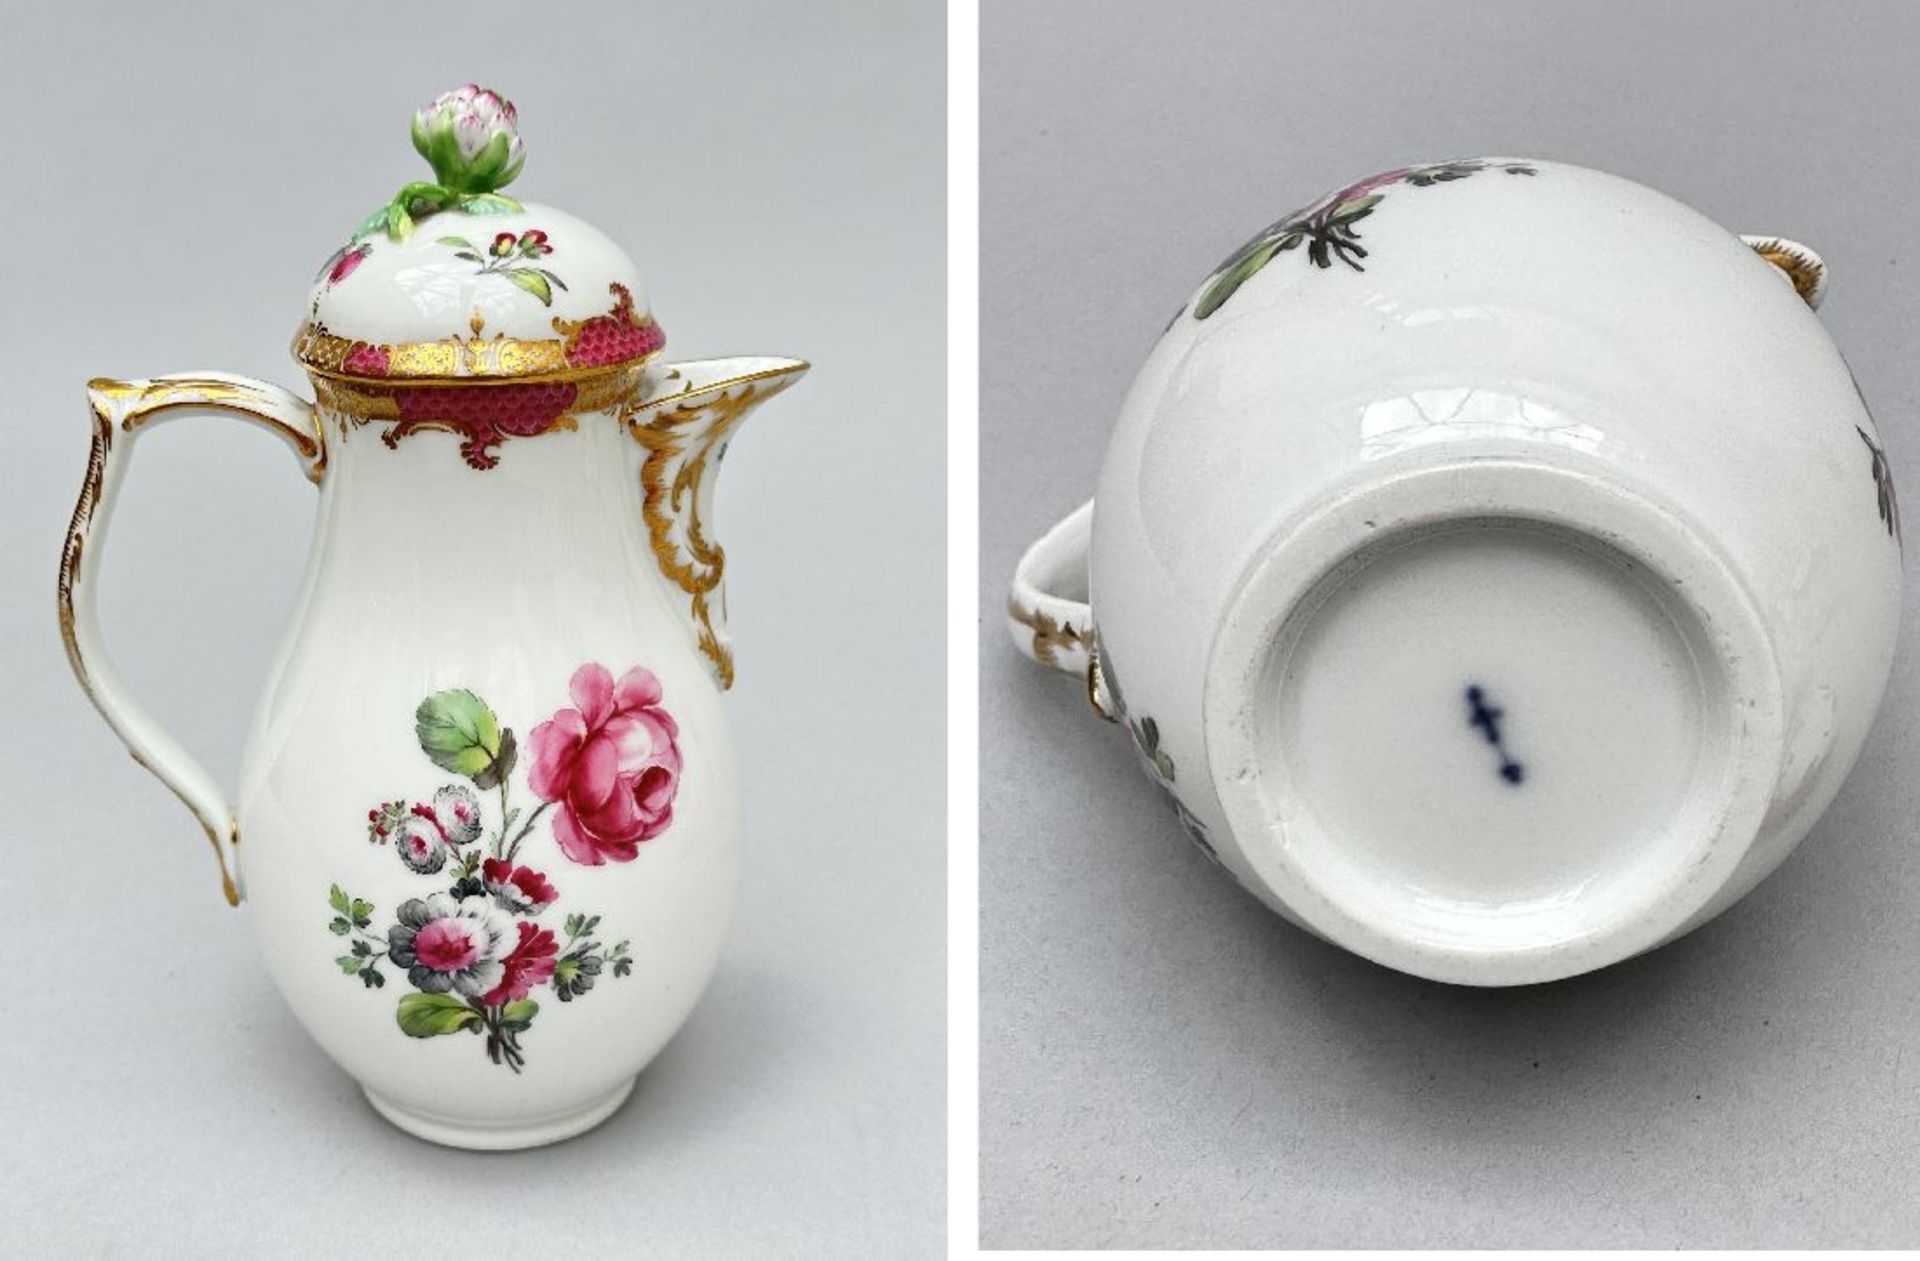 Case with a Meissen porcelain coffee set, 19th century (*) - Image 9 of 9